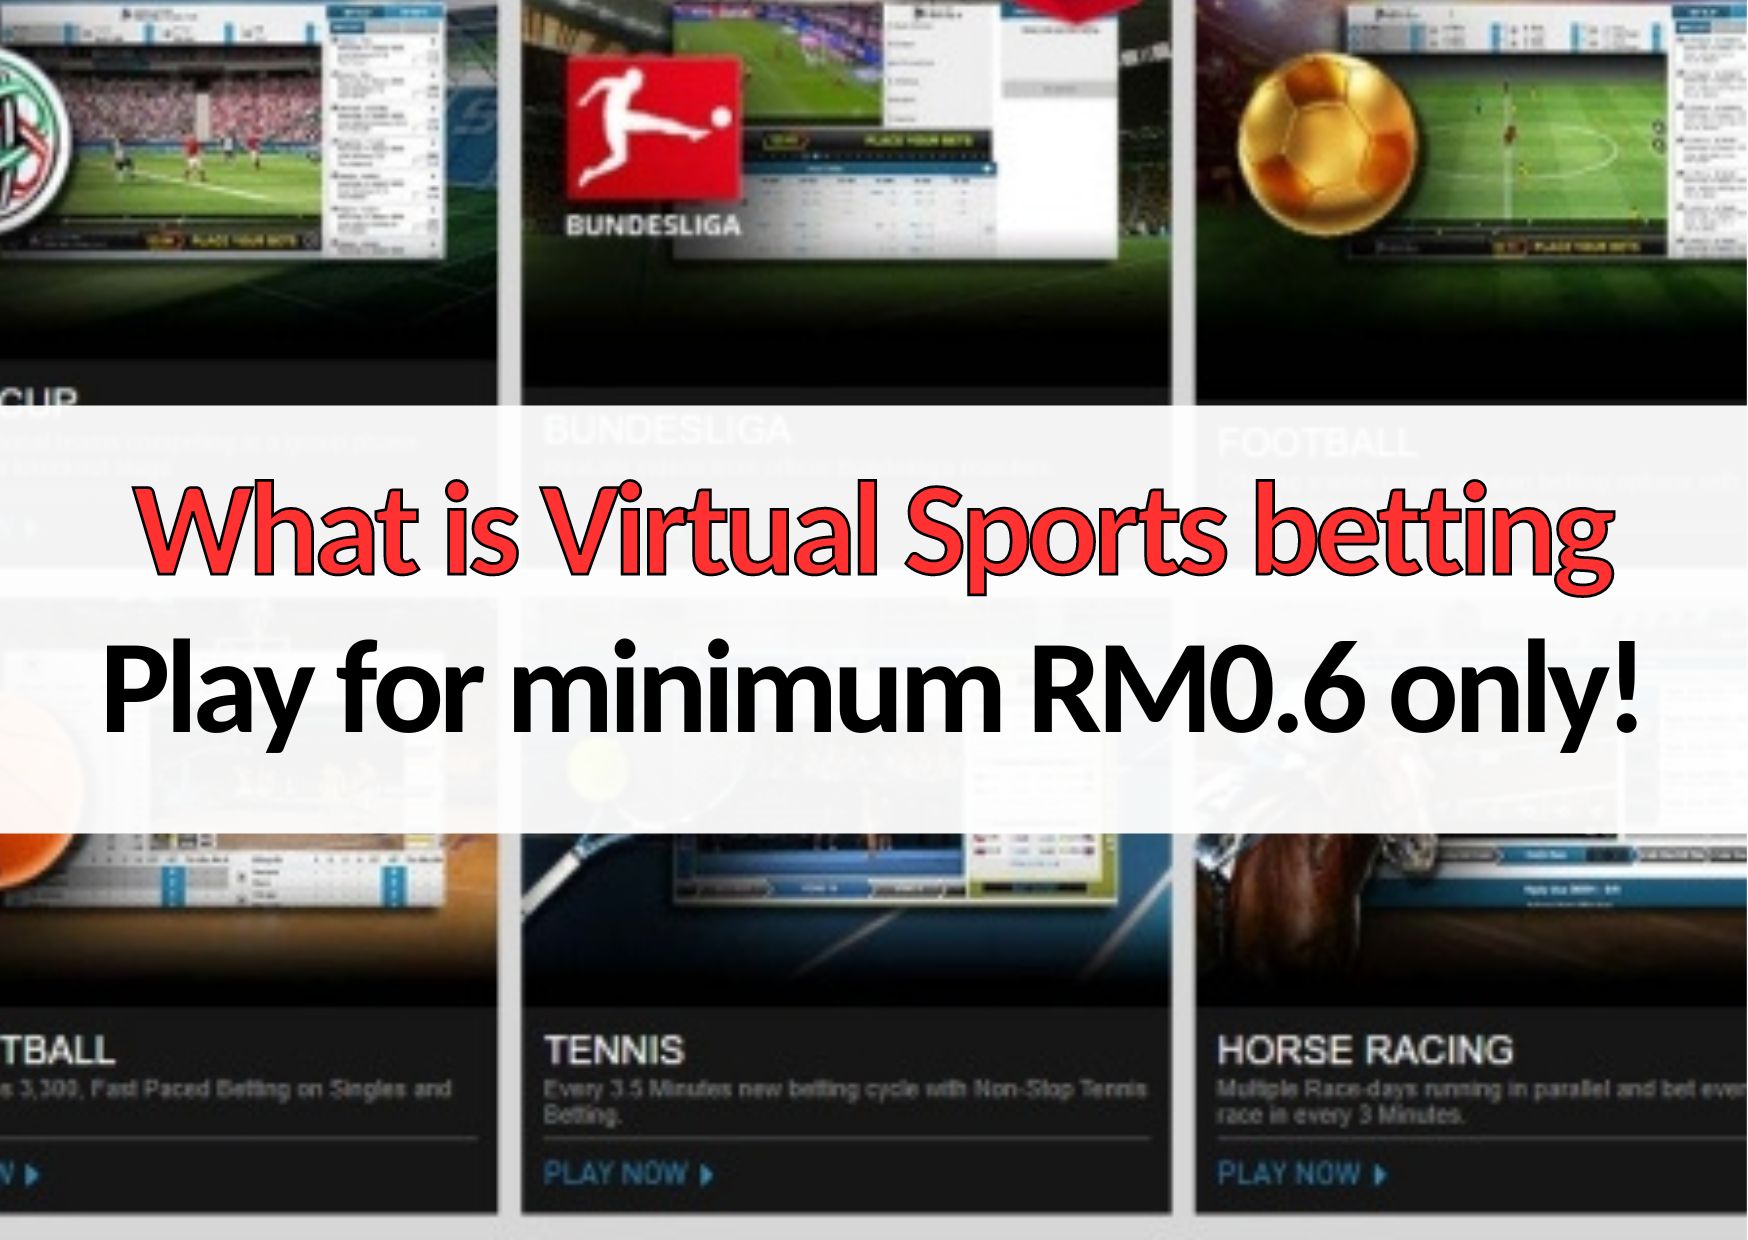 what is virtual sports betting play for minimum rm06 only!